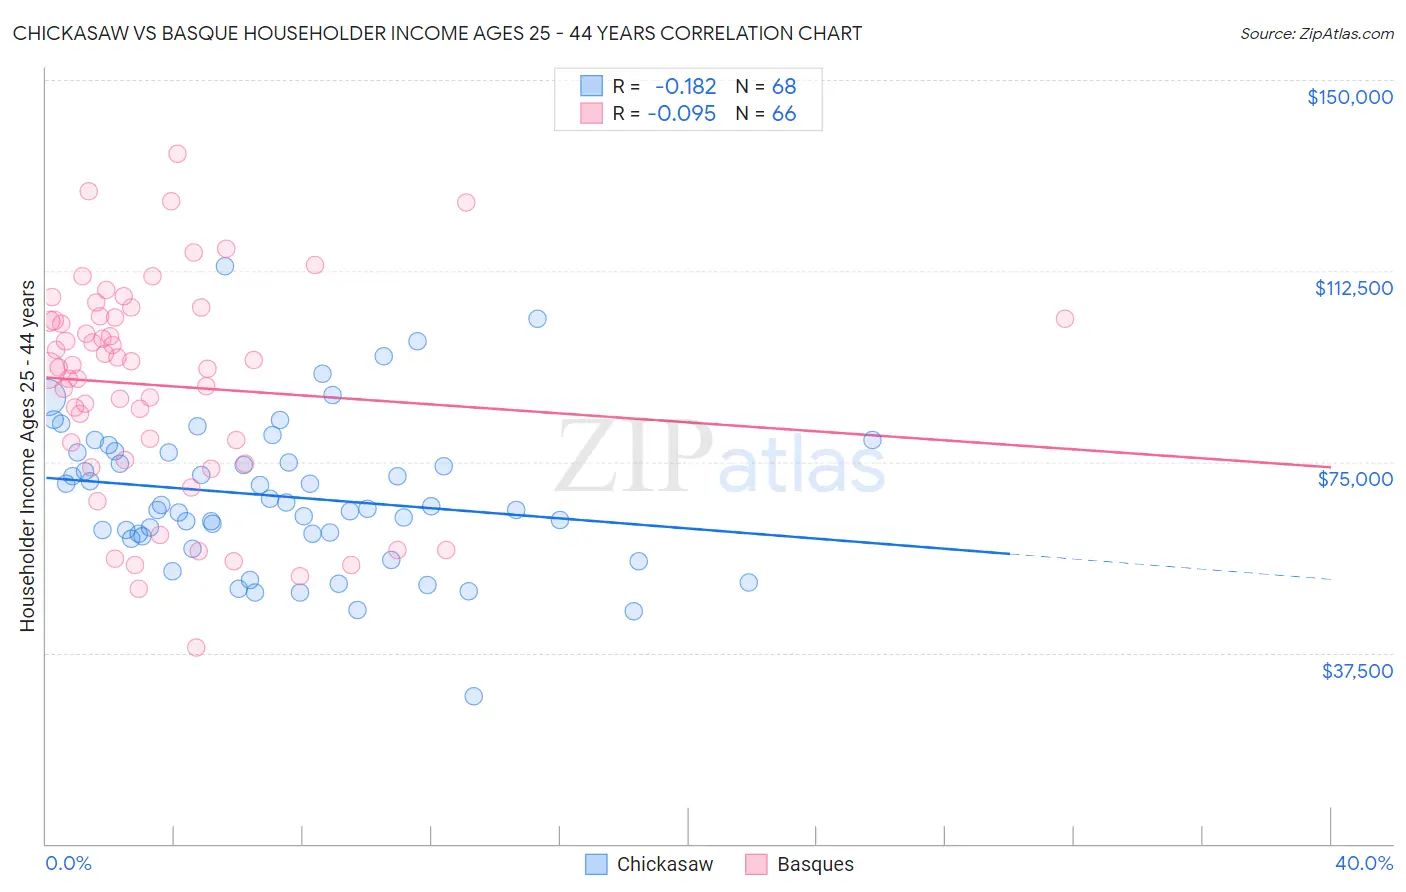 Chickasaw vs Basque Householder Income Ages 25 - 44 years